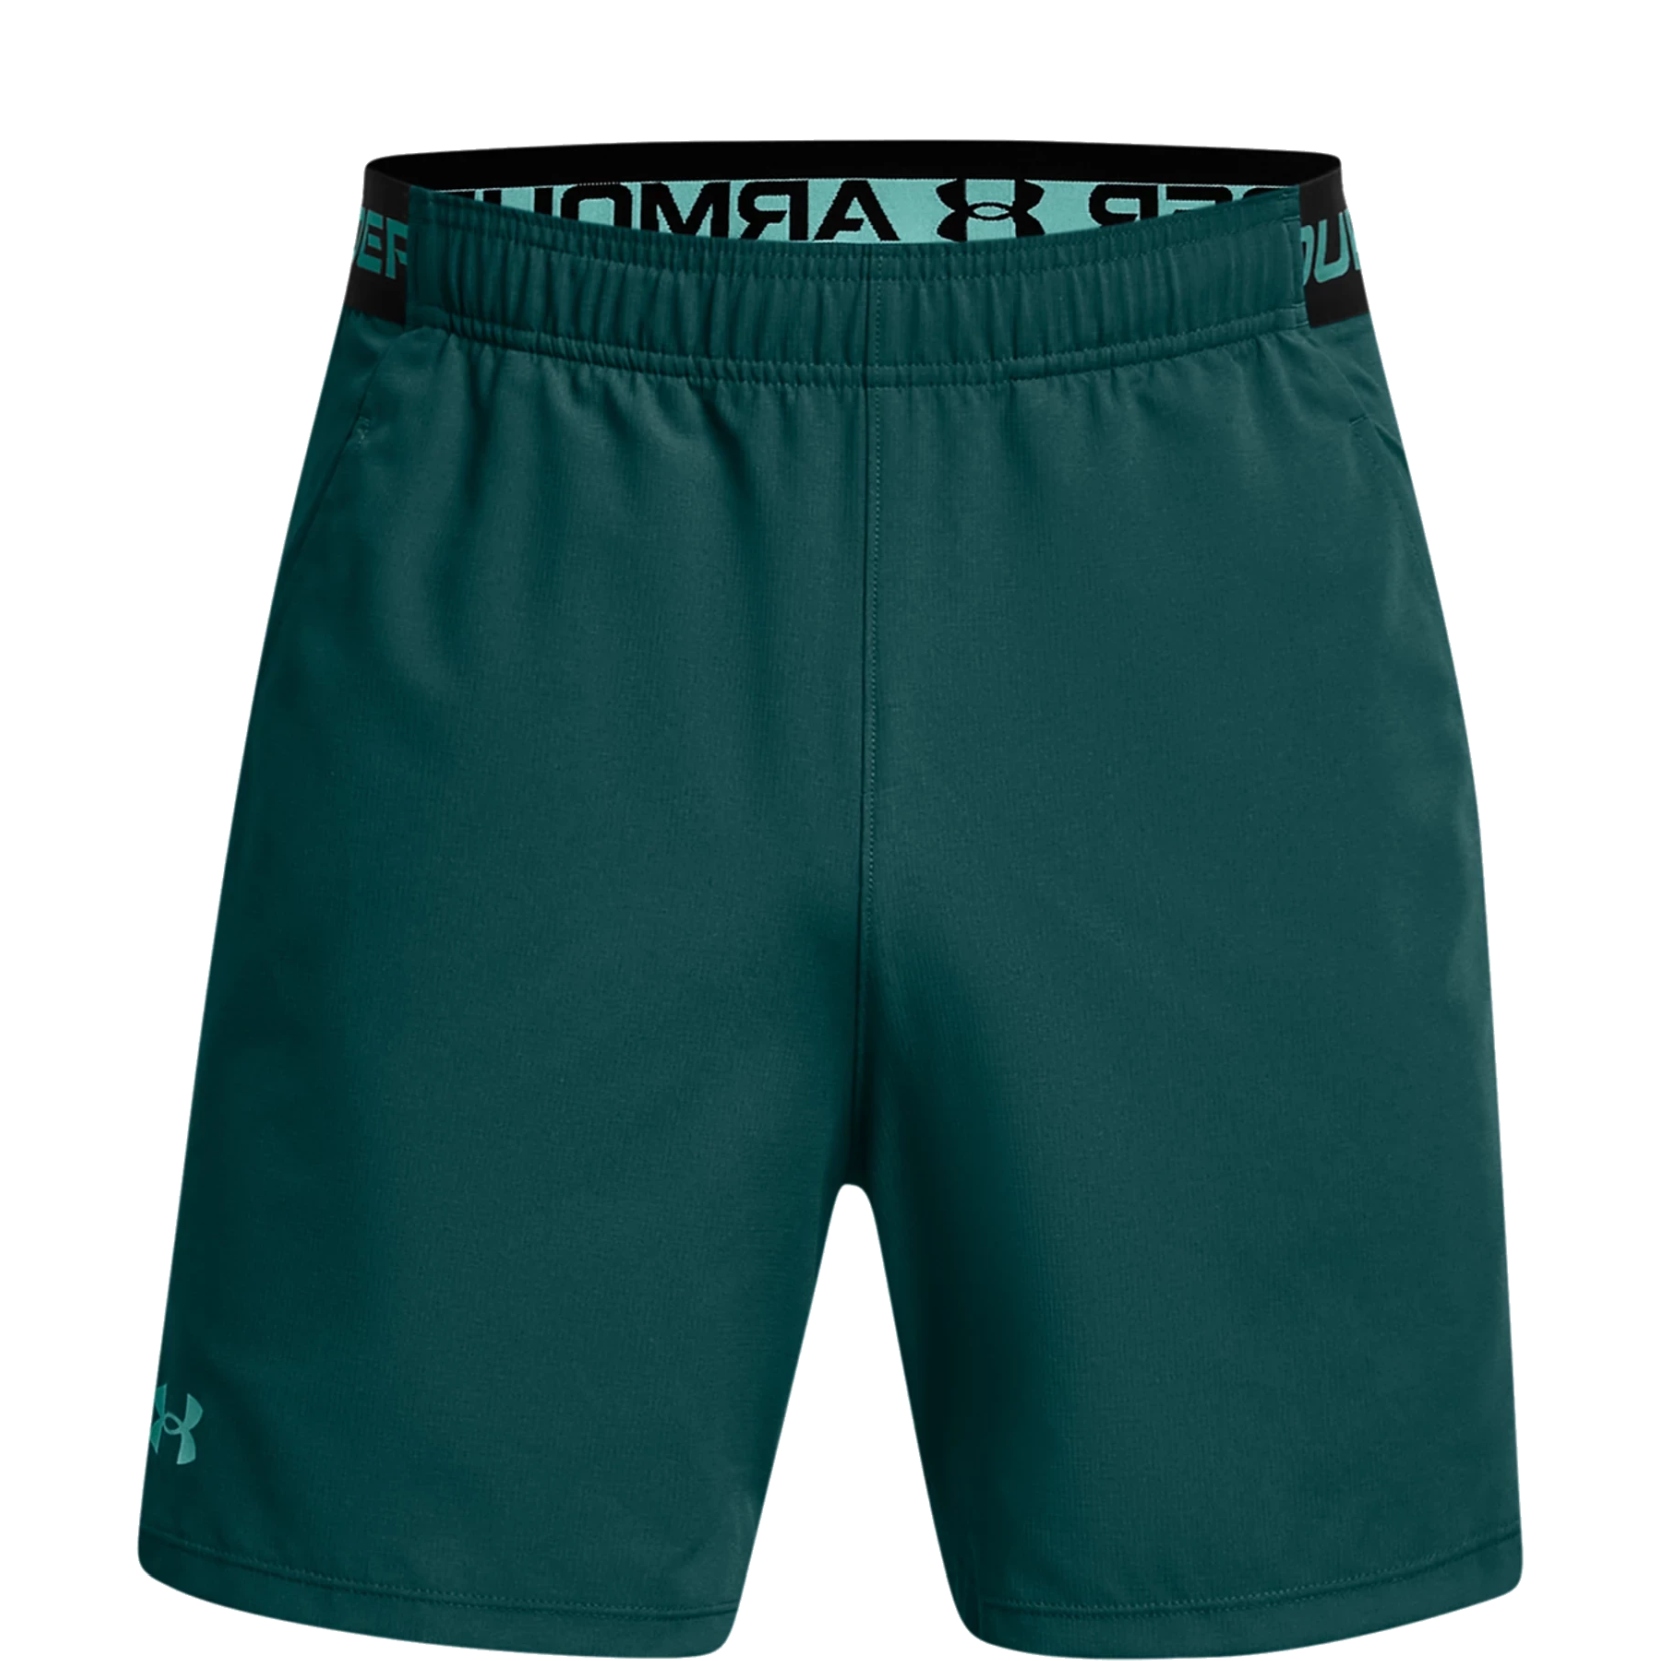 Productfoto van Under Armour UA Vanish Woven Shorts 15 cm Heren - Hydro Teal/Radial Turquoise